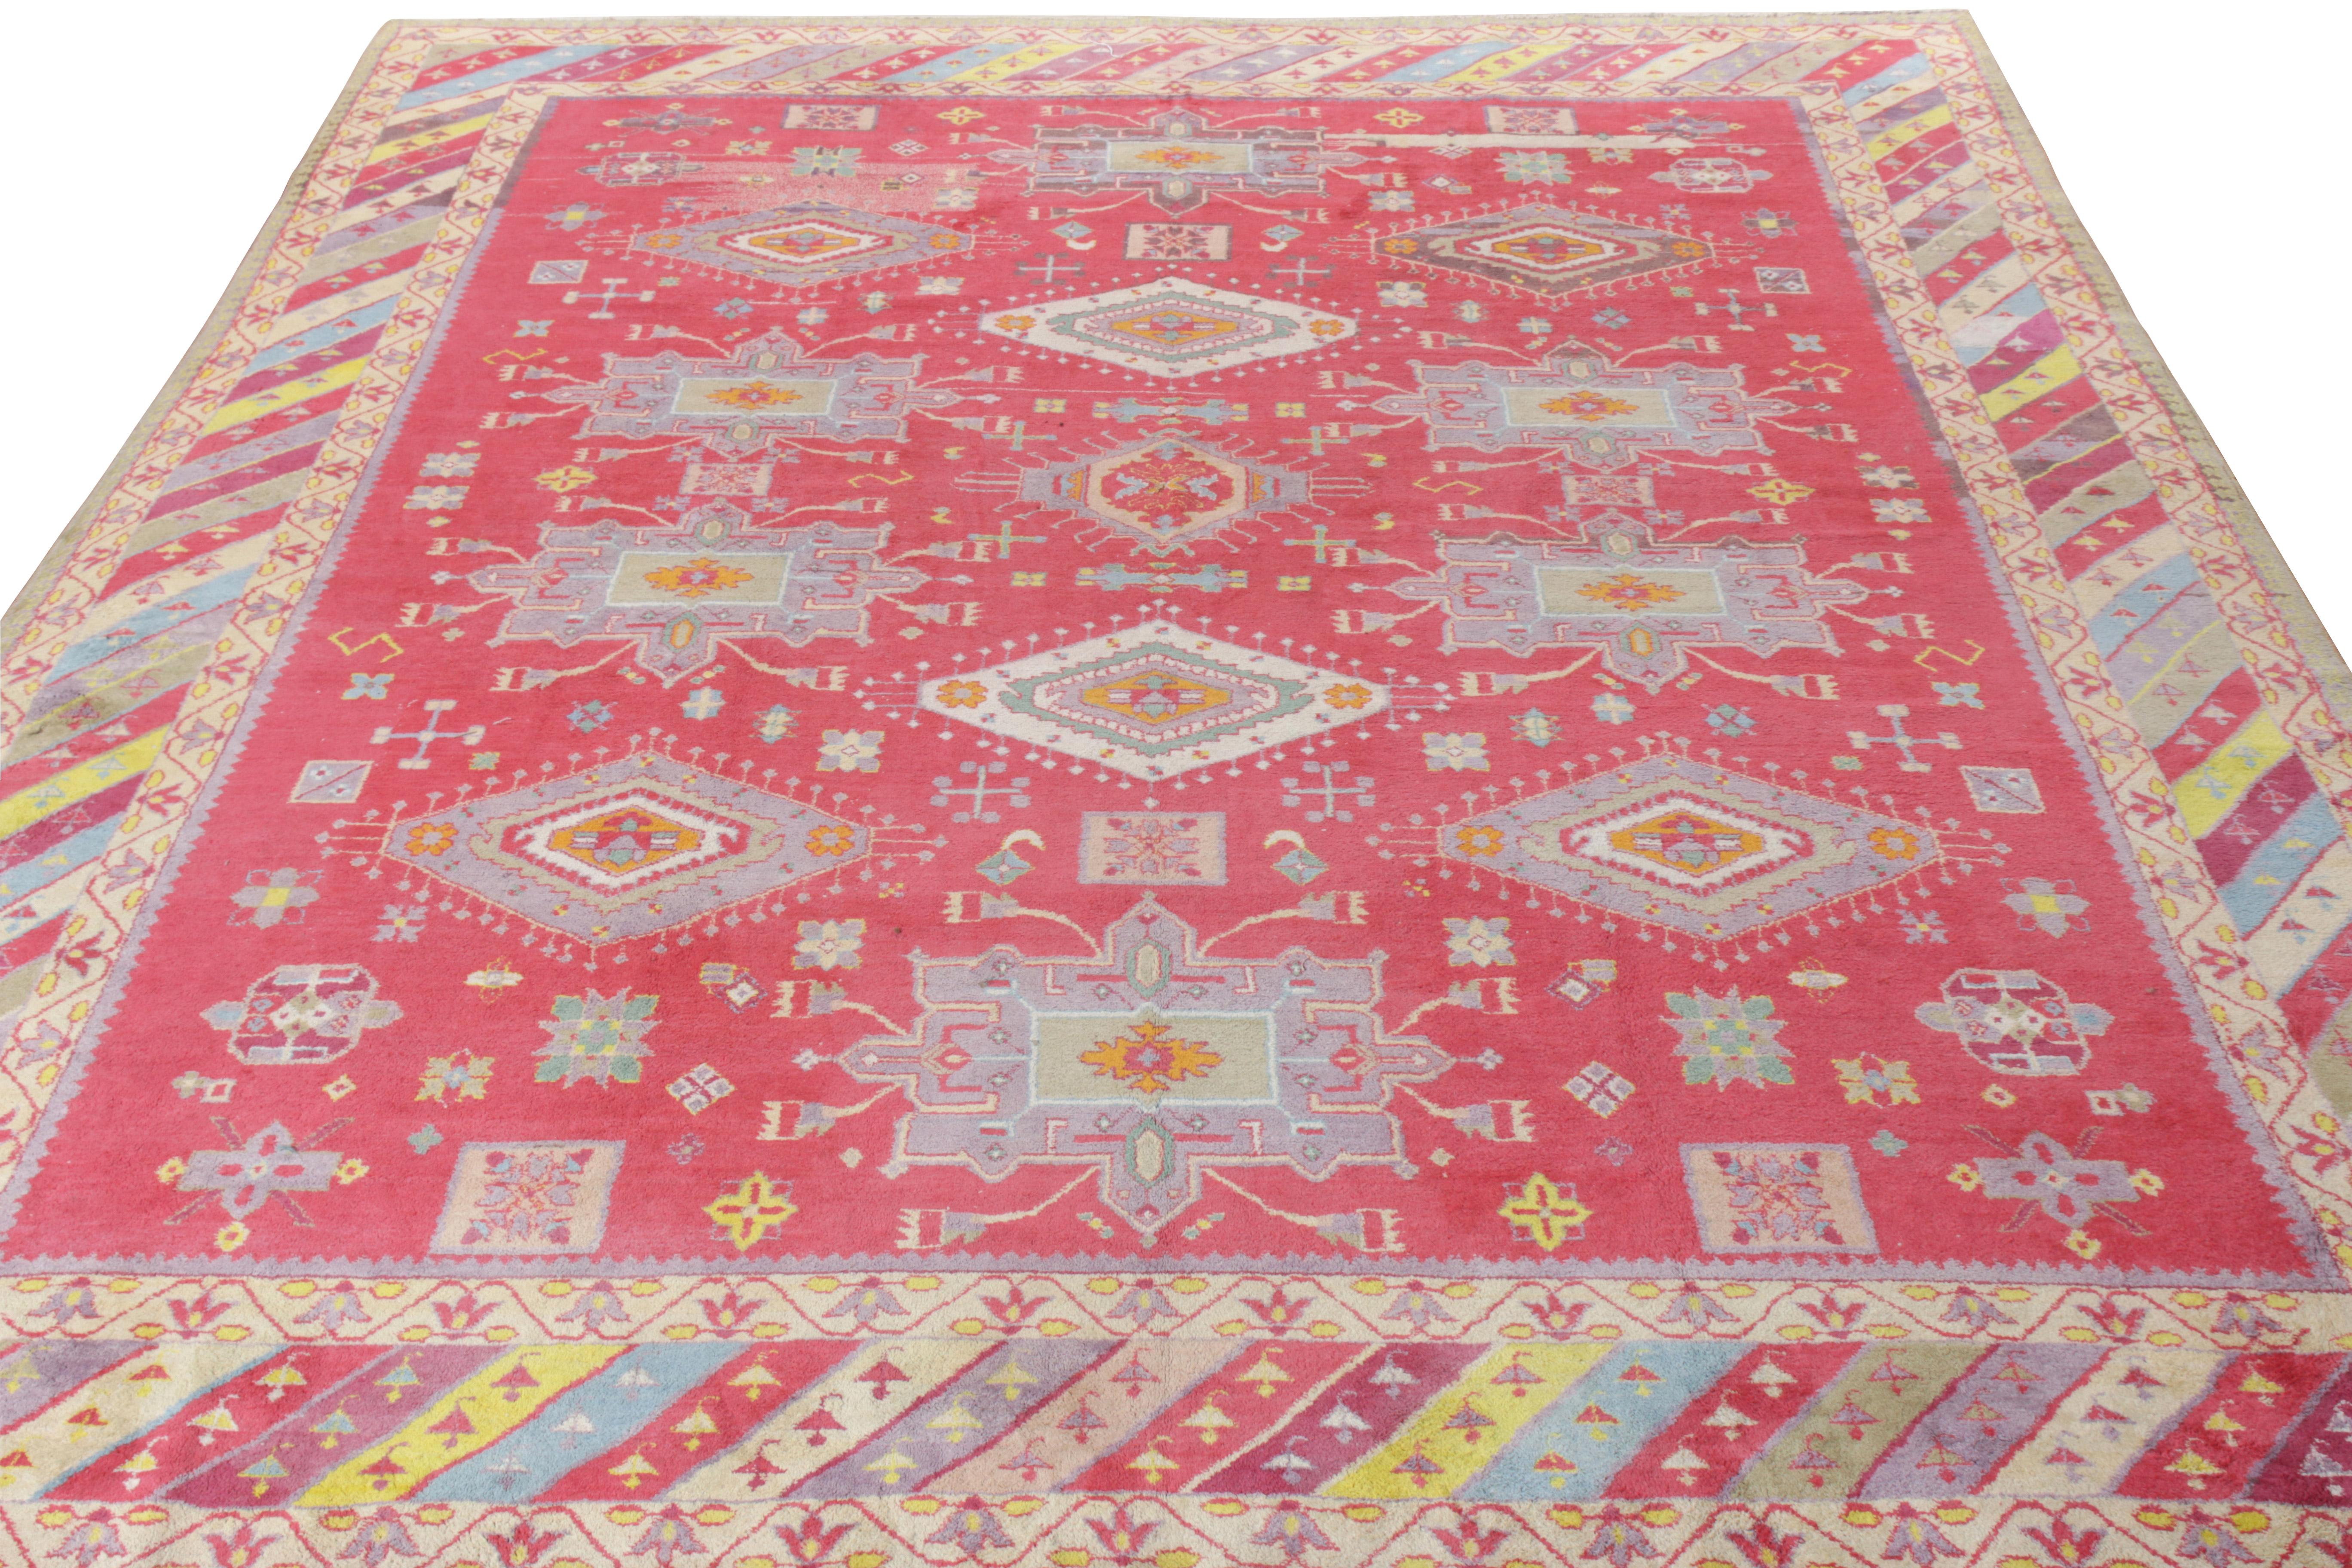 Hand knotted in soft, yet durable cotton, an antique Agra rug from the 1920s originating from India—now joining Rug & Kilim’s Antique & Vintage collection. Bearing an all over geometric-floral pattern in medallion style, the rug embraces a vibrant